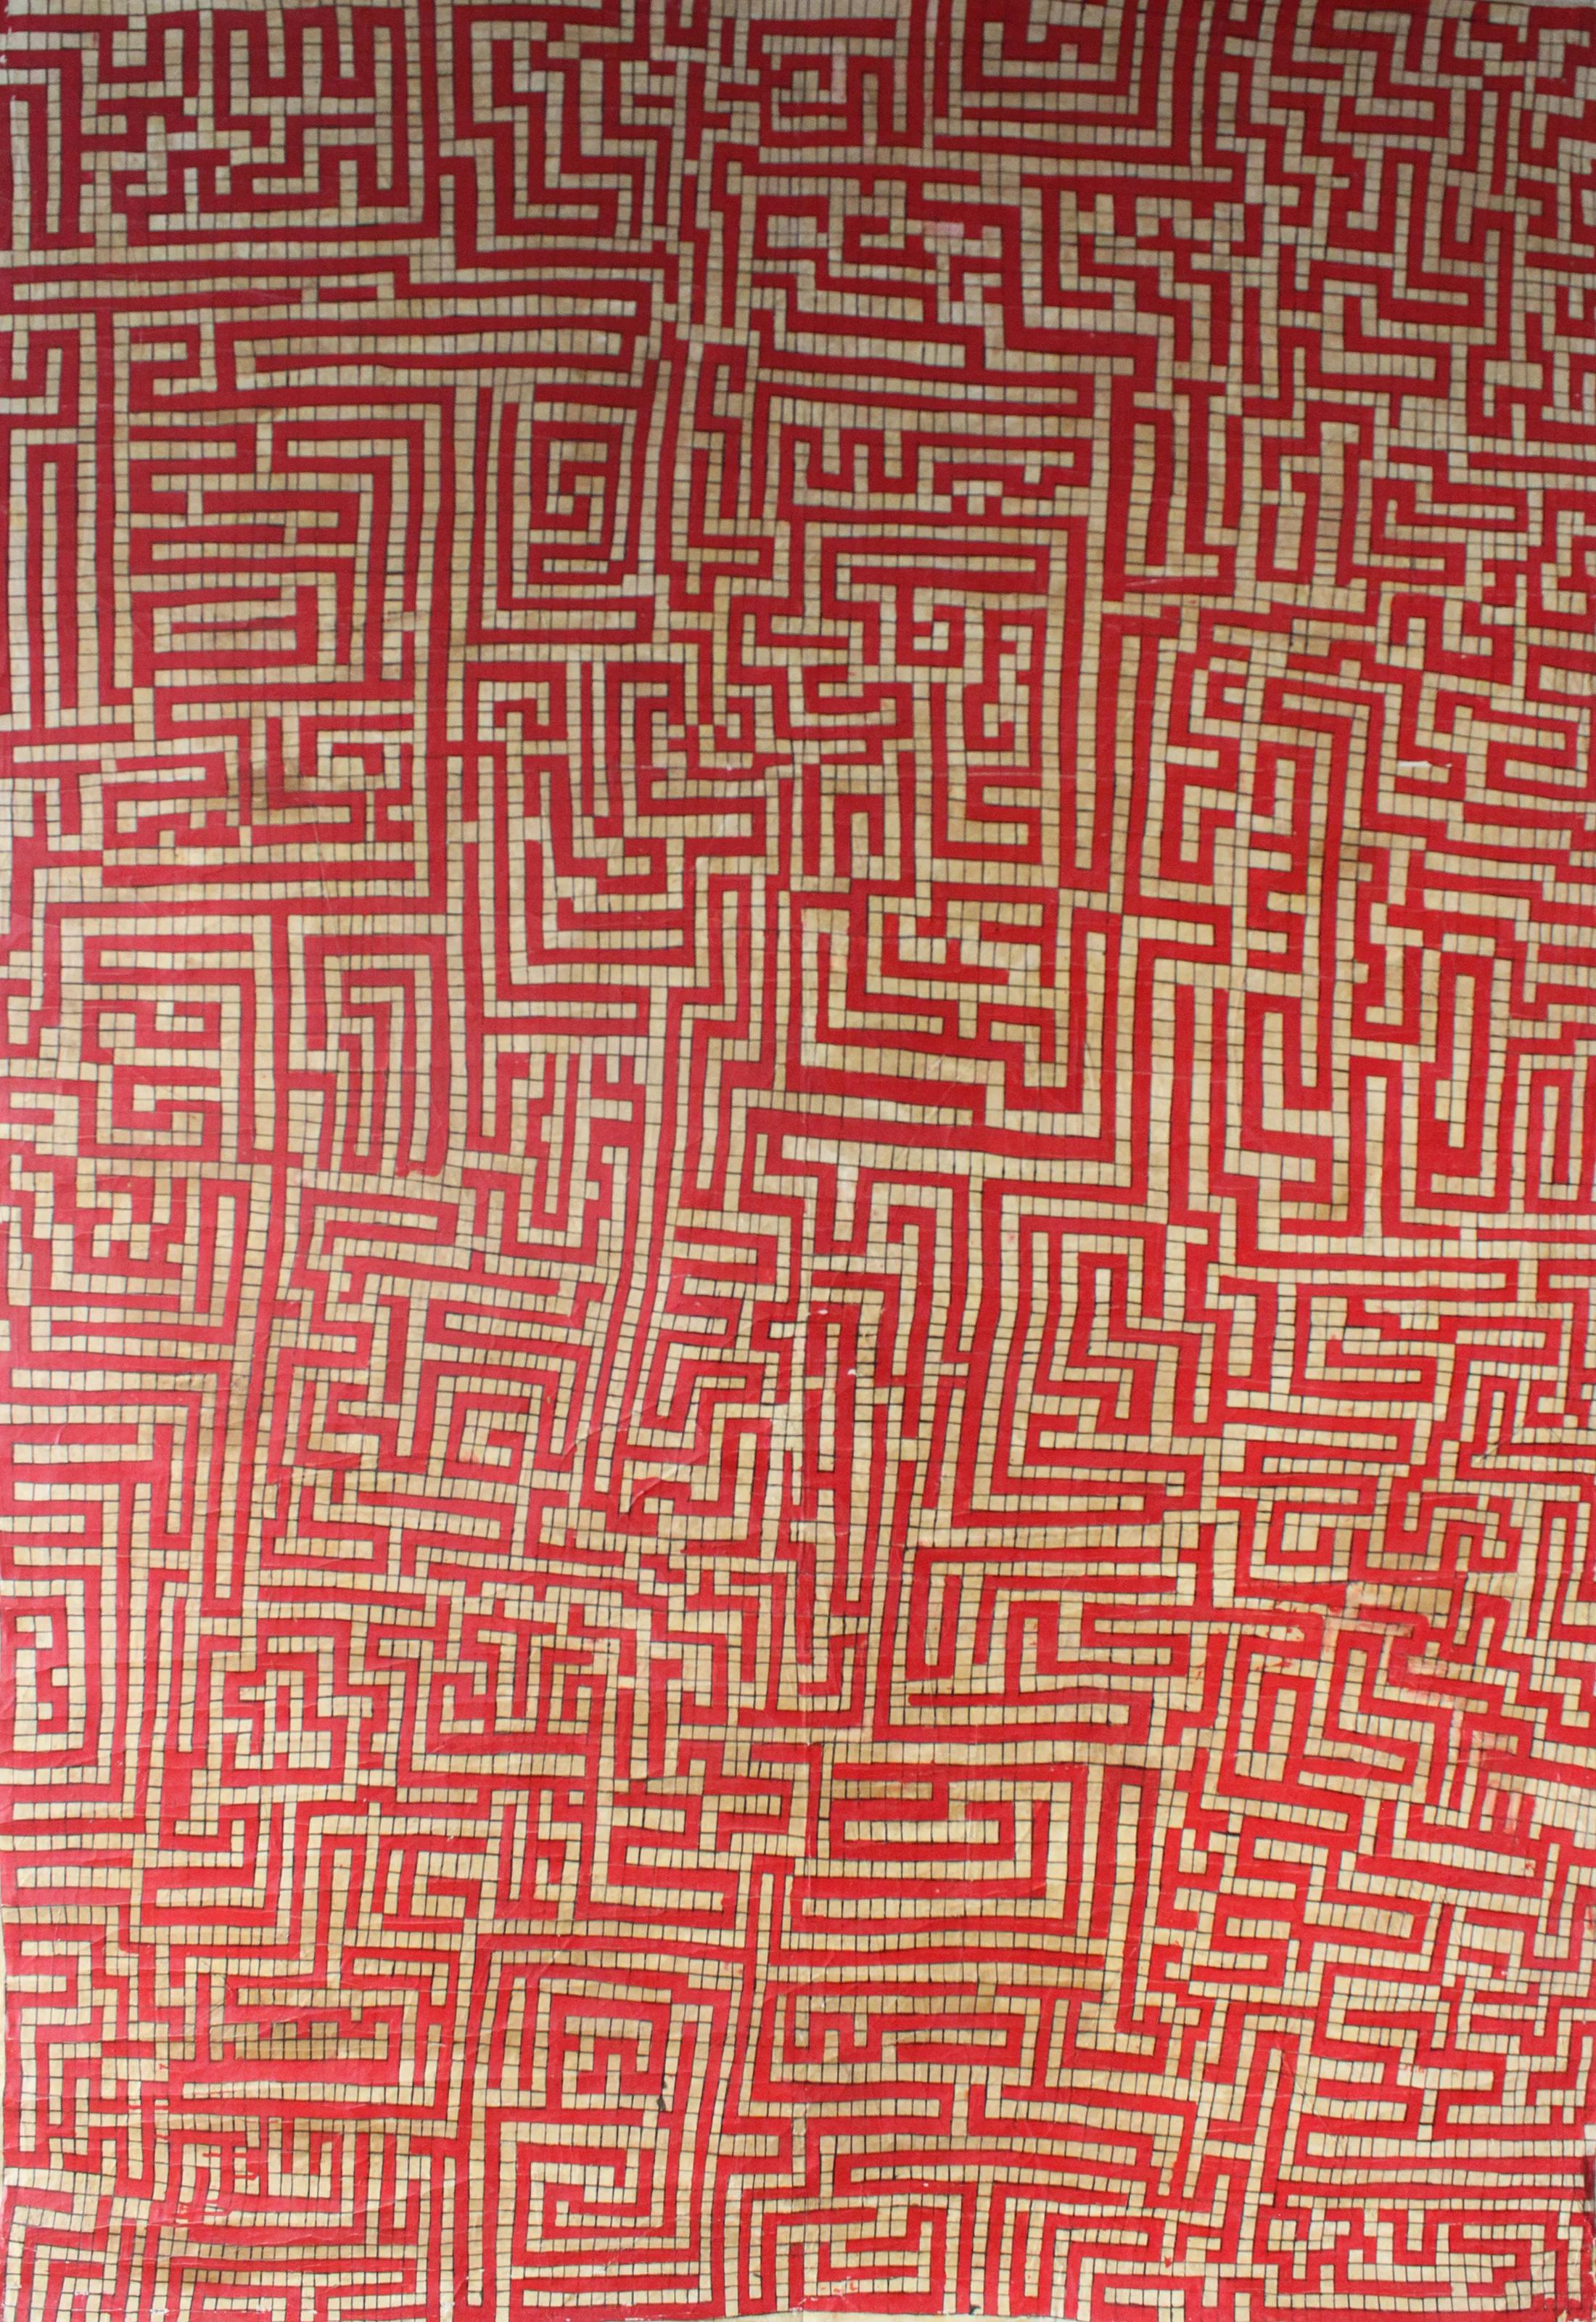 "Labyrinthine II" Ink on Fabric Painting 89" x 63" inch by Mohamed Monaiseer